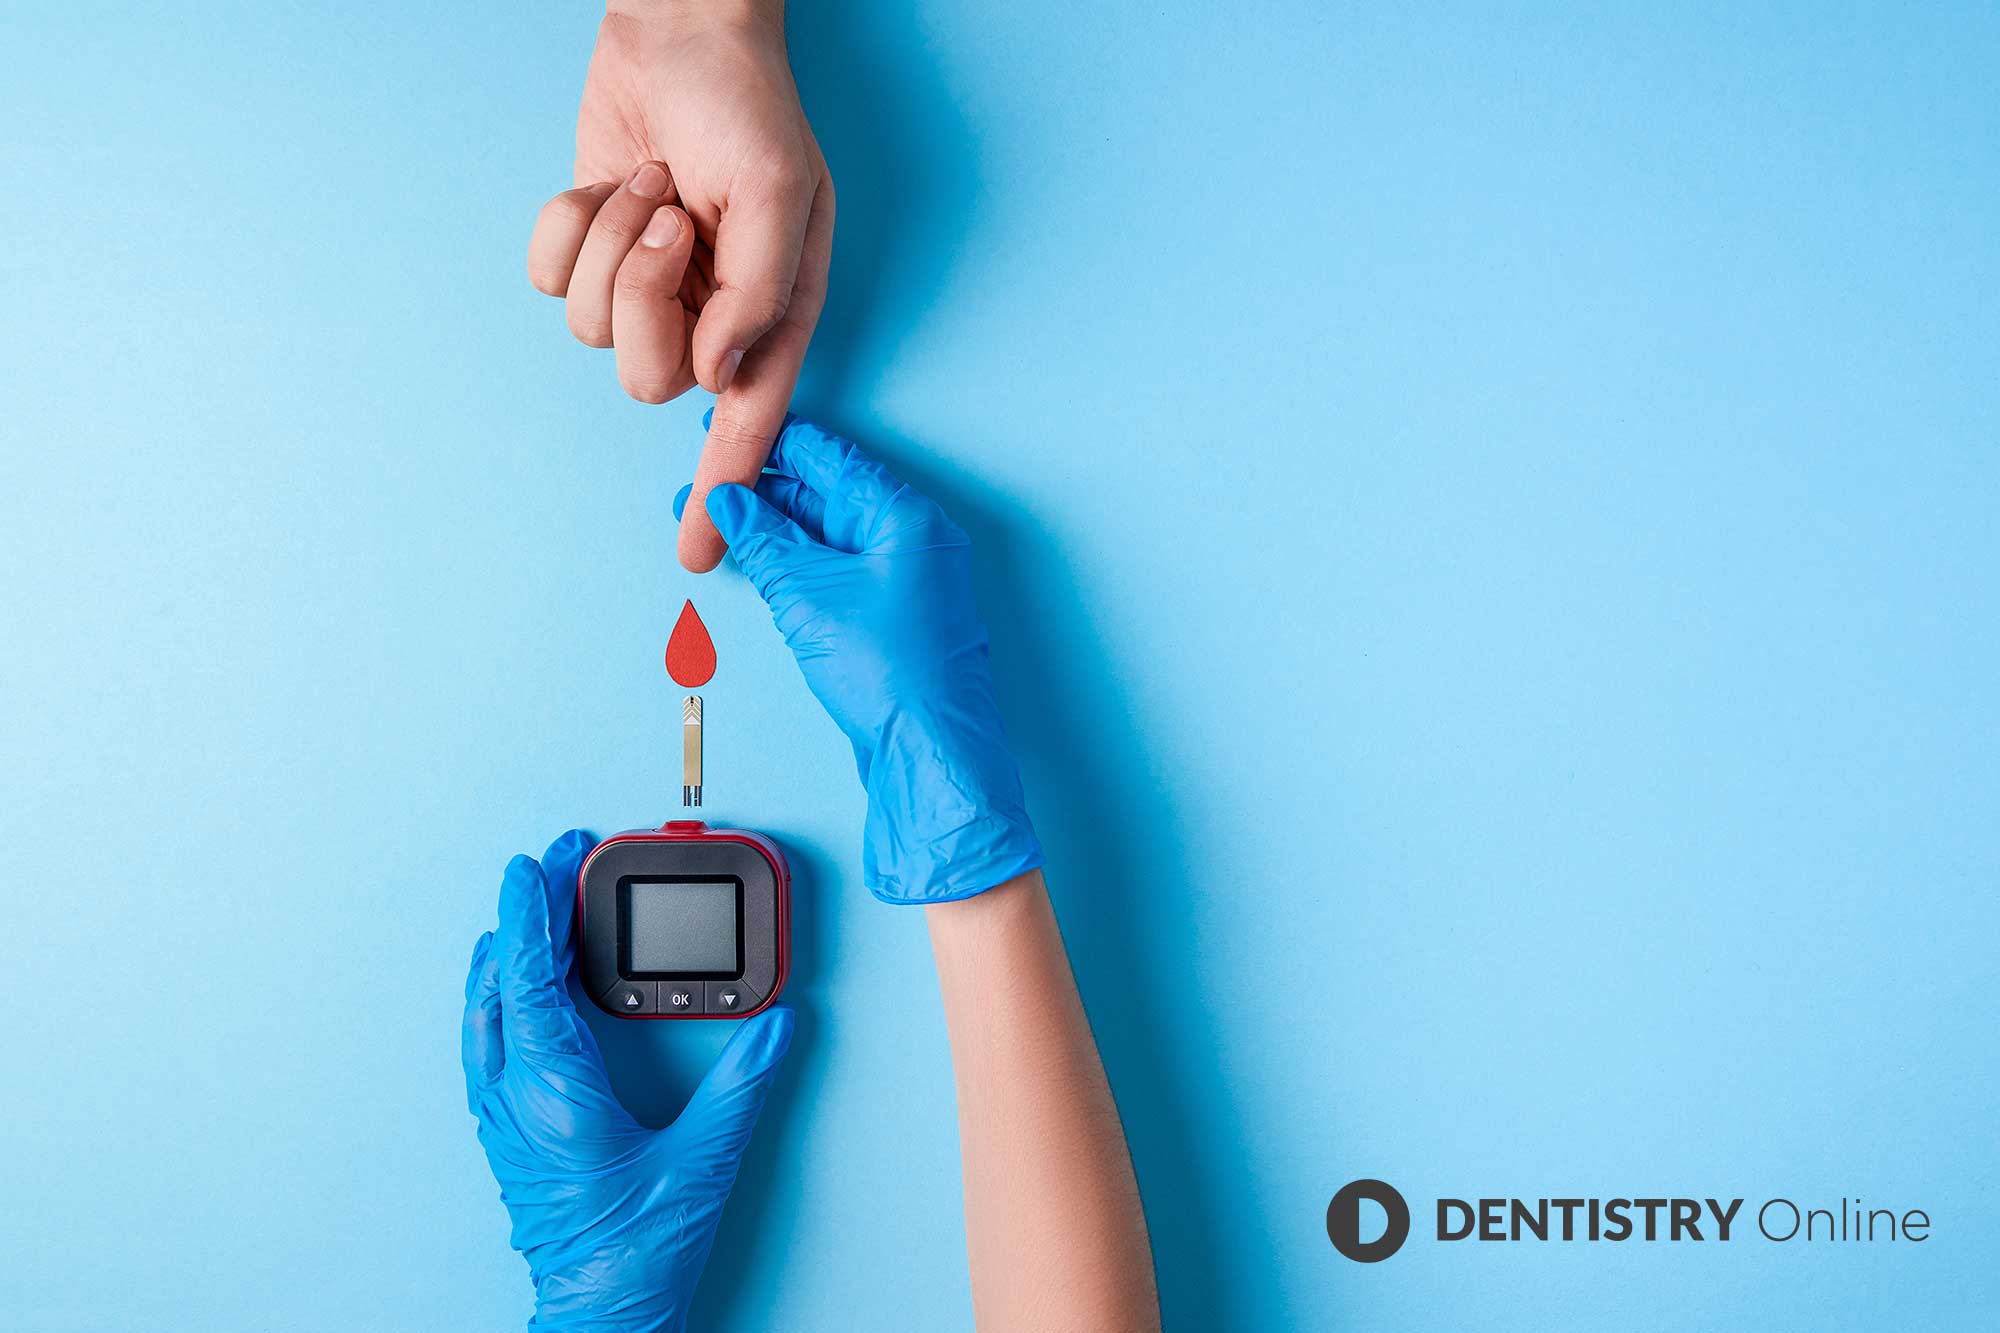 Dentists and dental teams identify more than 8% of undiagnosed diabetes diagnoses, according to research